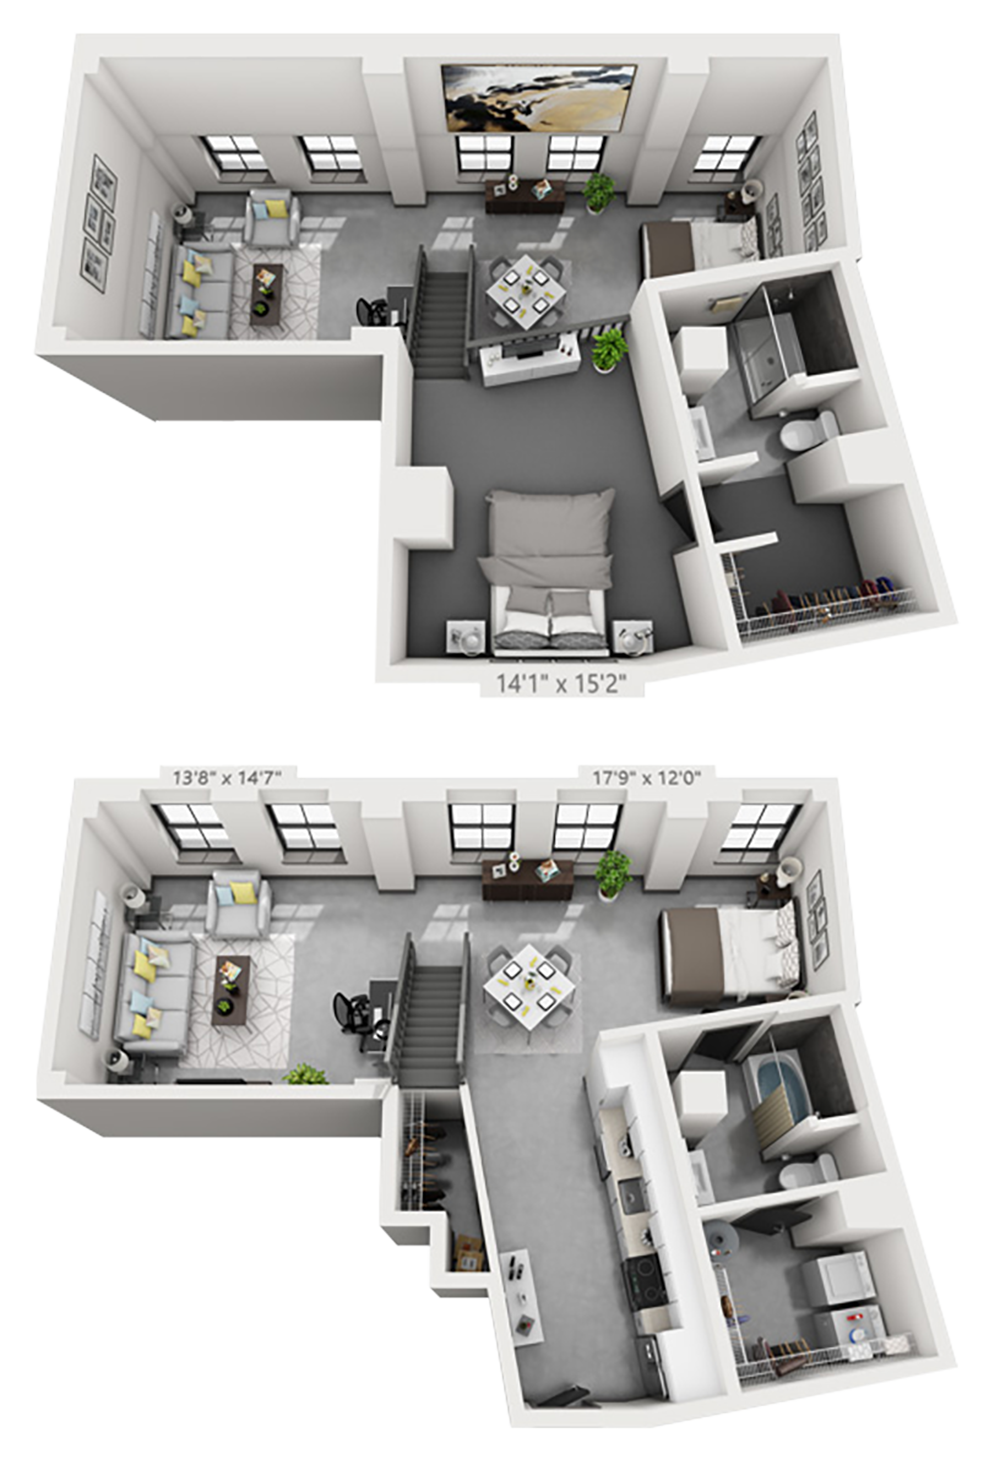 B4M plan is 2 bed, 2 bath and 1,283 square feet